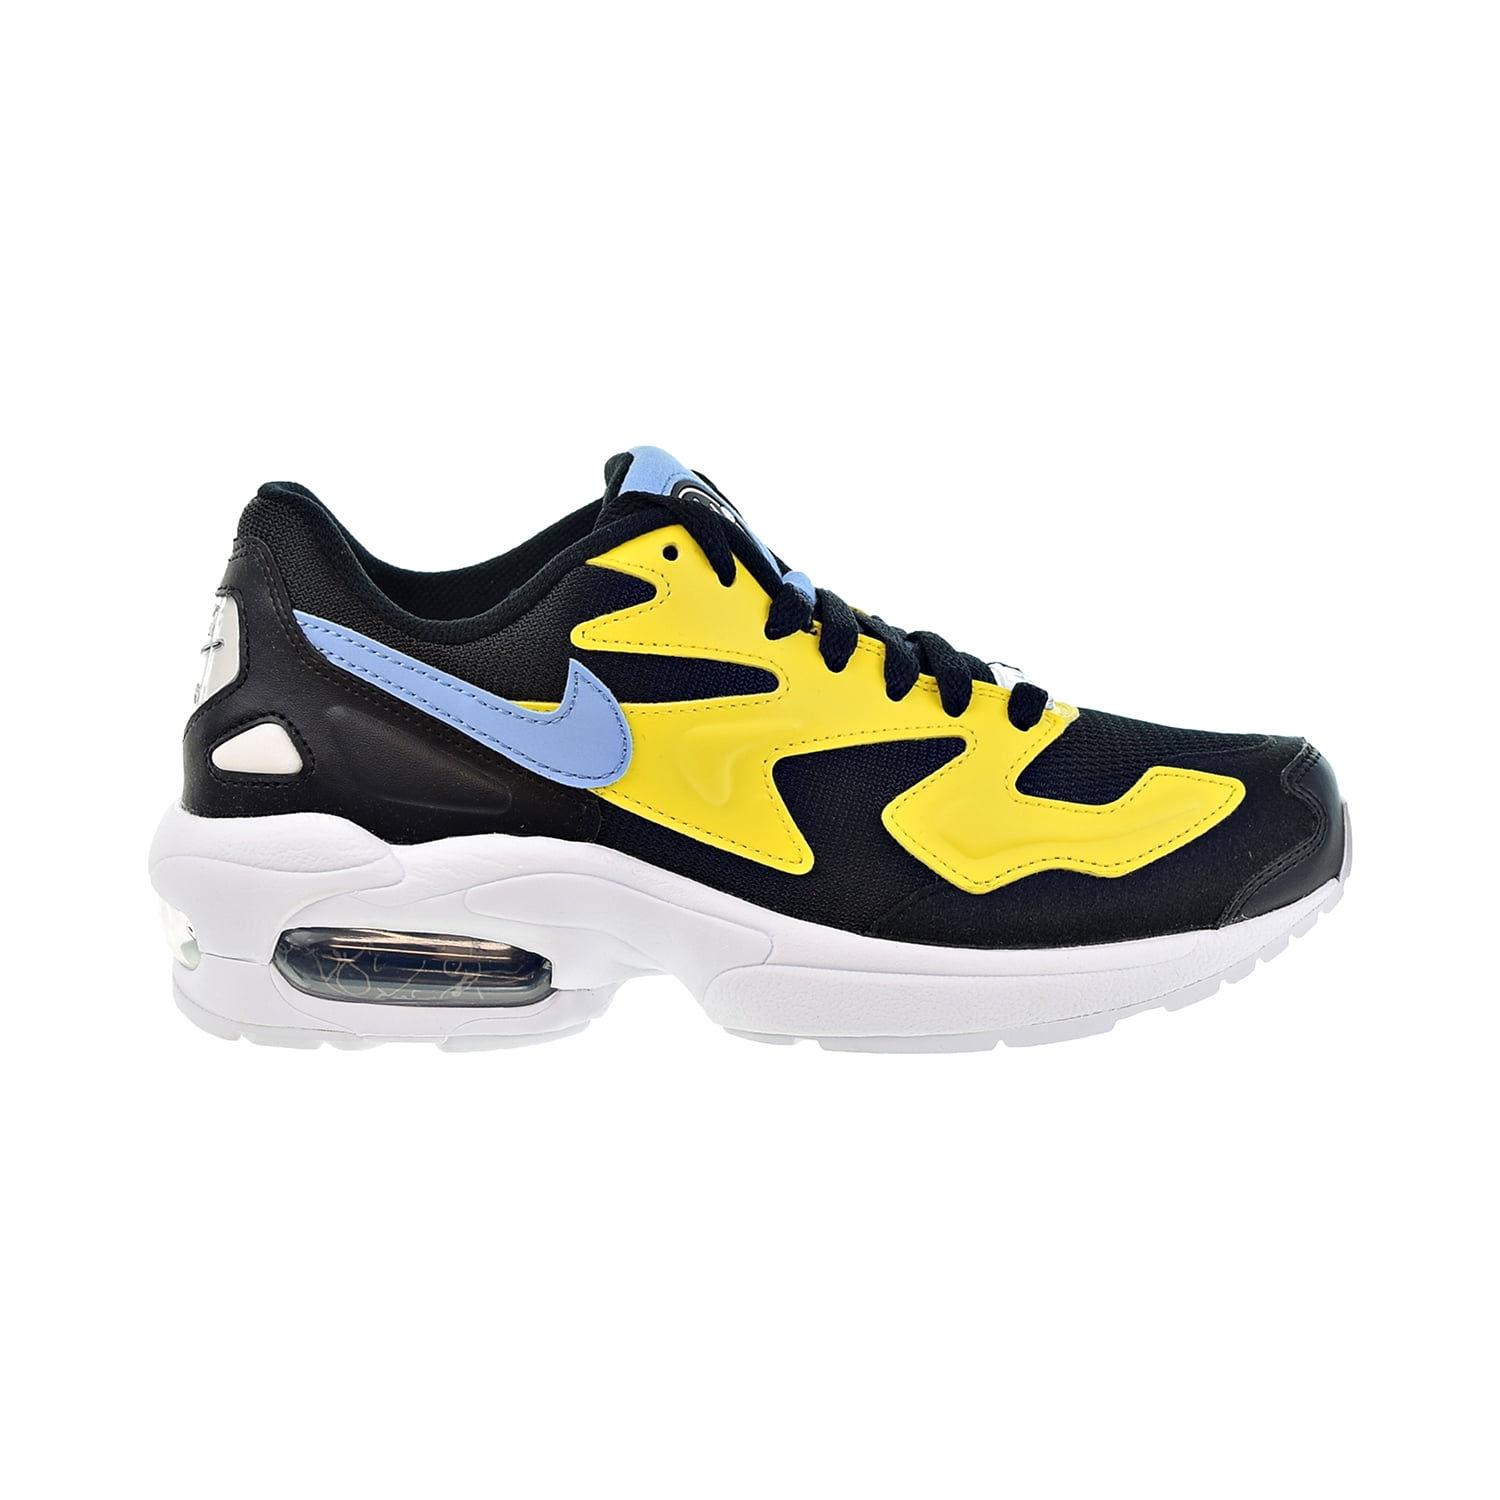 light blue and yellow nike shoes